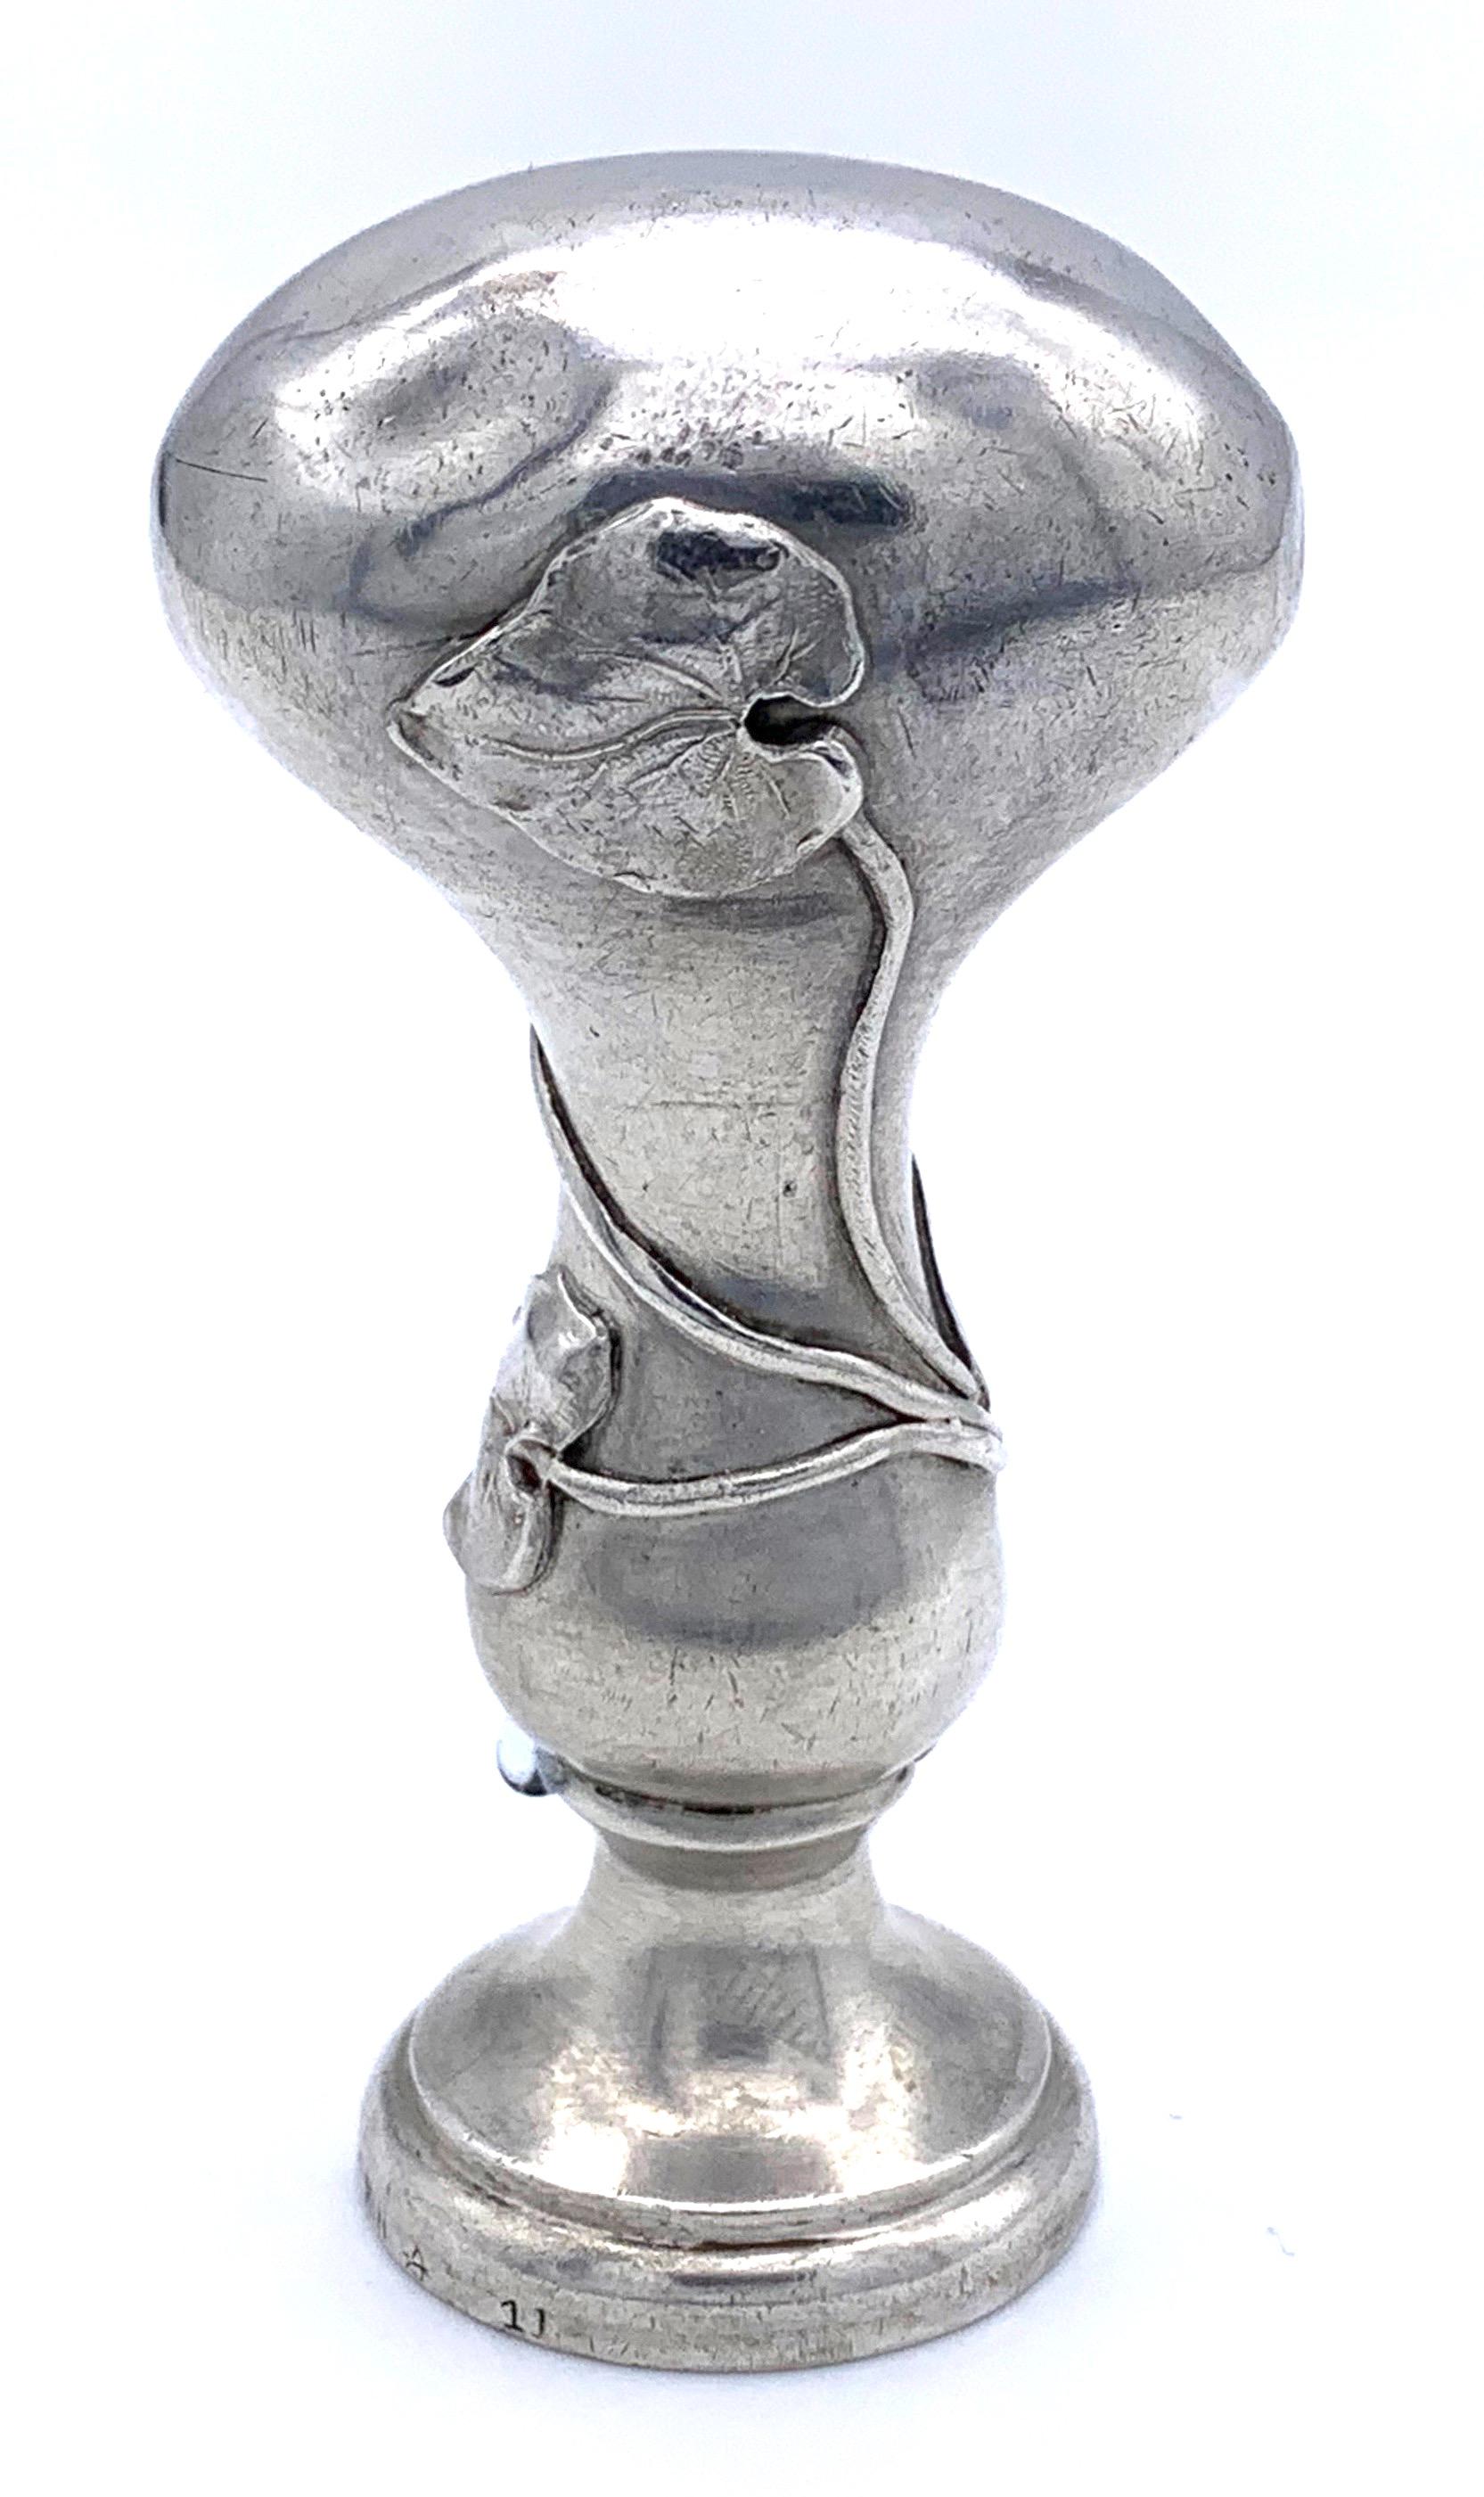 This Art Nouveau desktop seal is engraved with the  ligated initials A and B. Around the handle is a typical Art Nouveau entwined flower and leaf motive. The seal dates back to 1895-1900 and is impressed with German hallmarks for silver. 